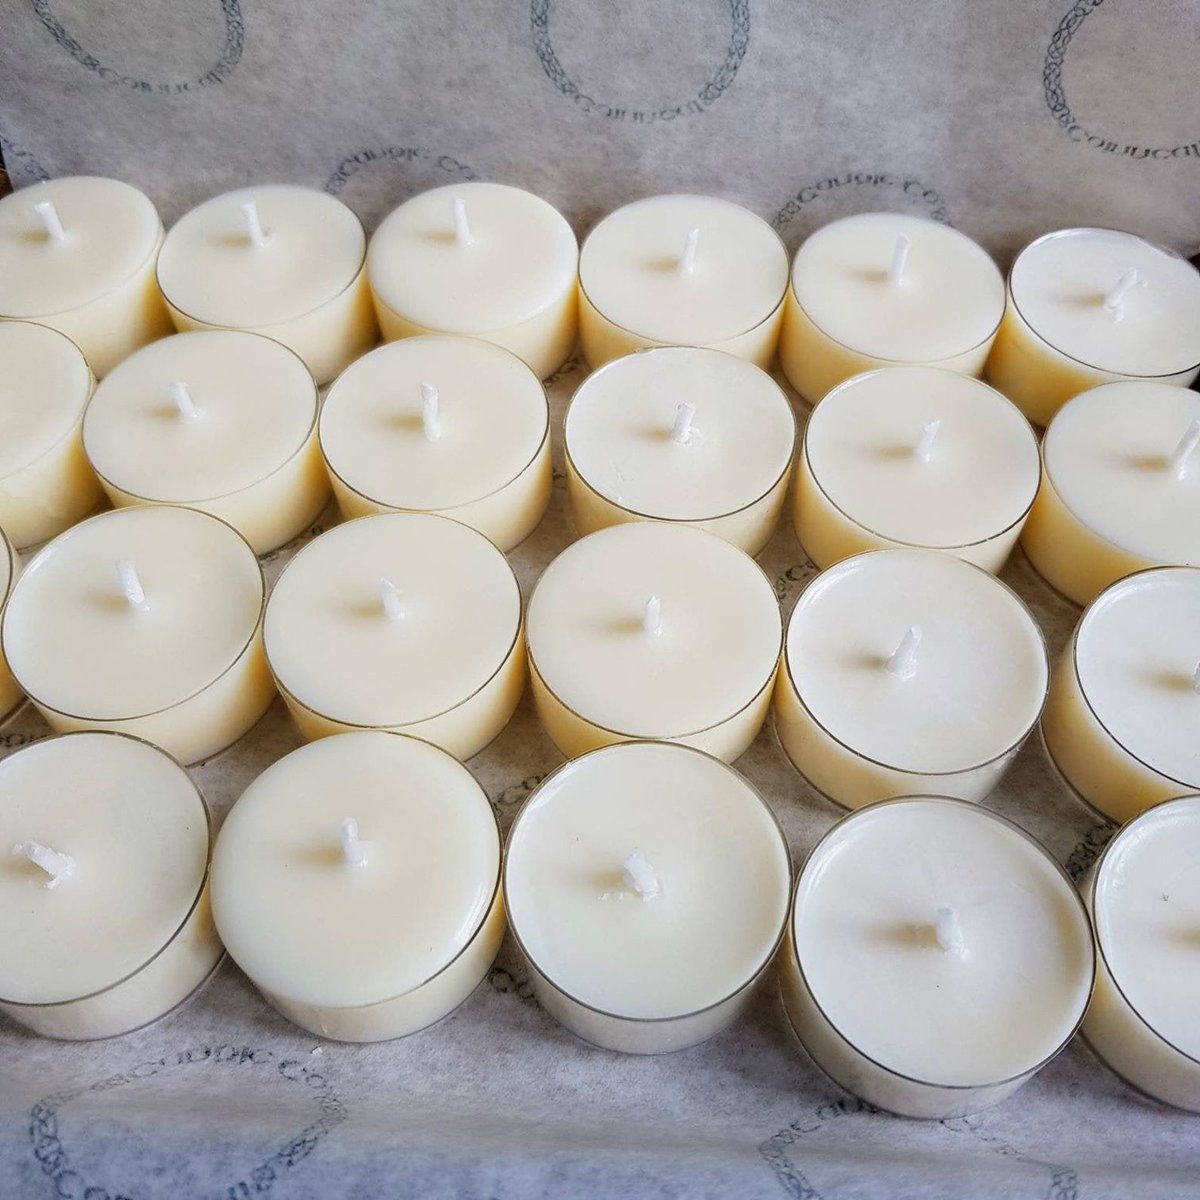 Soy Wax Tealights - 4+ Hour Unscented